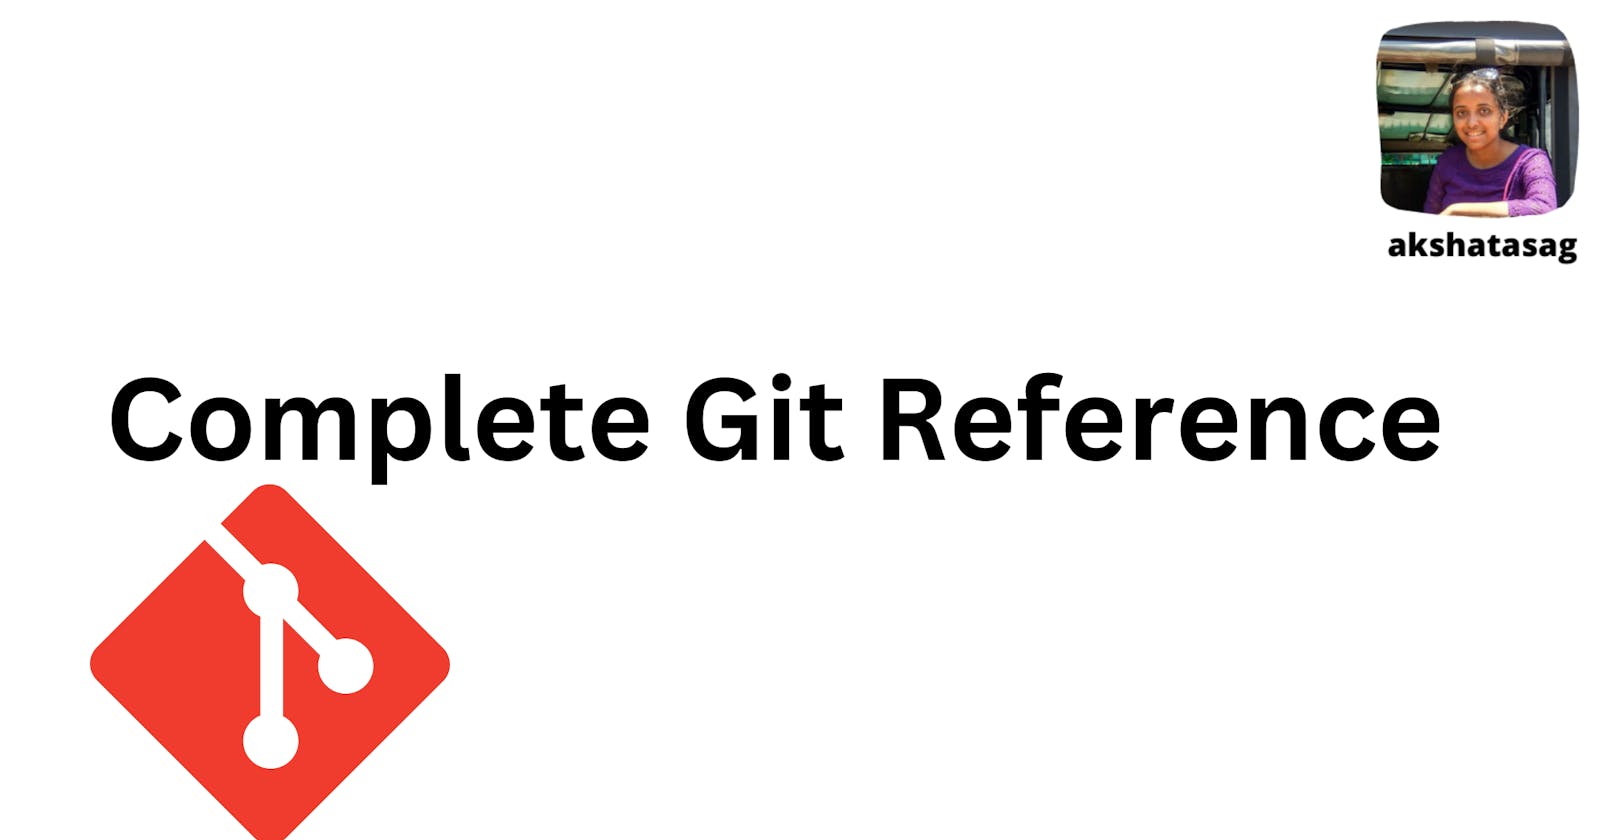 #1 Why is Git important